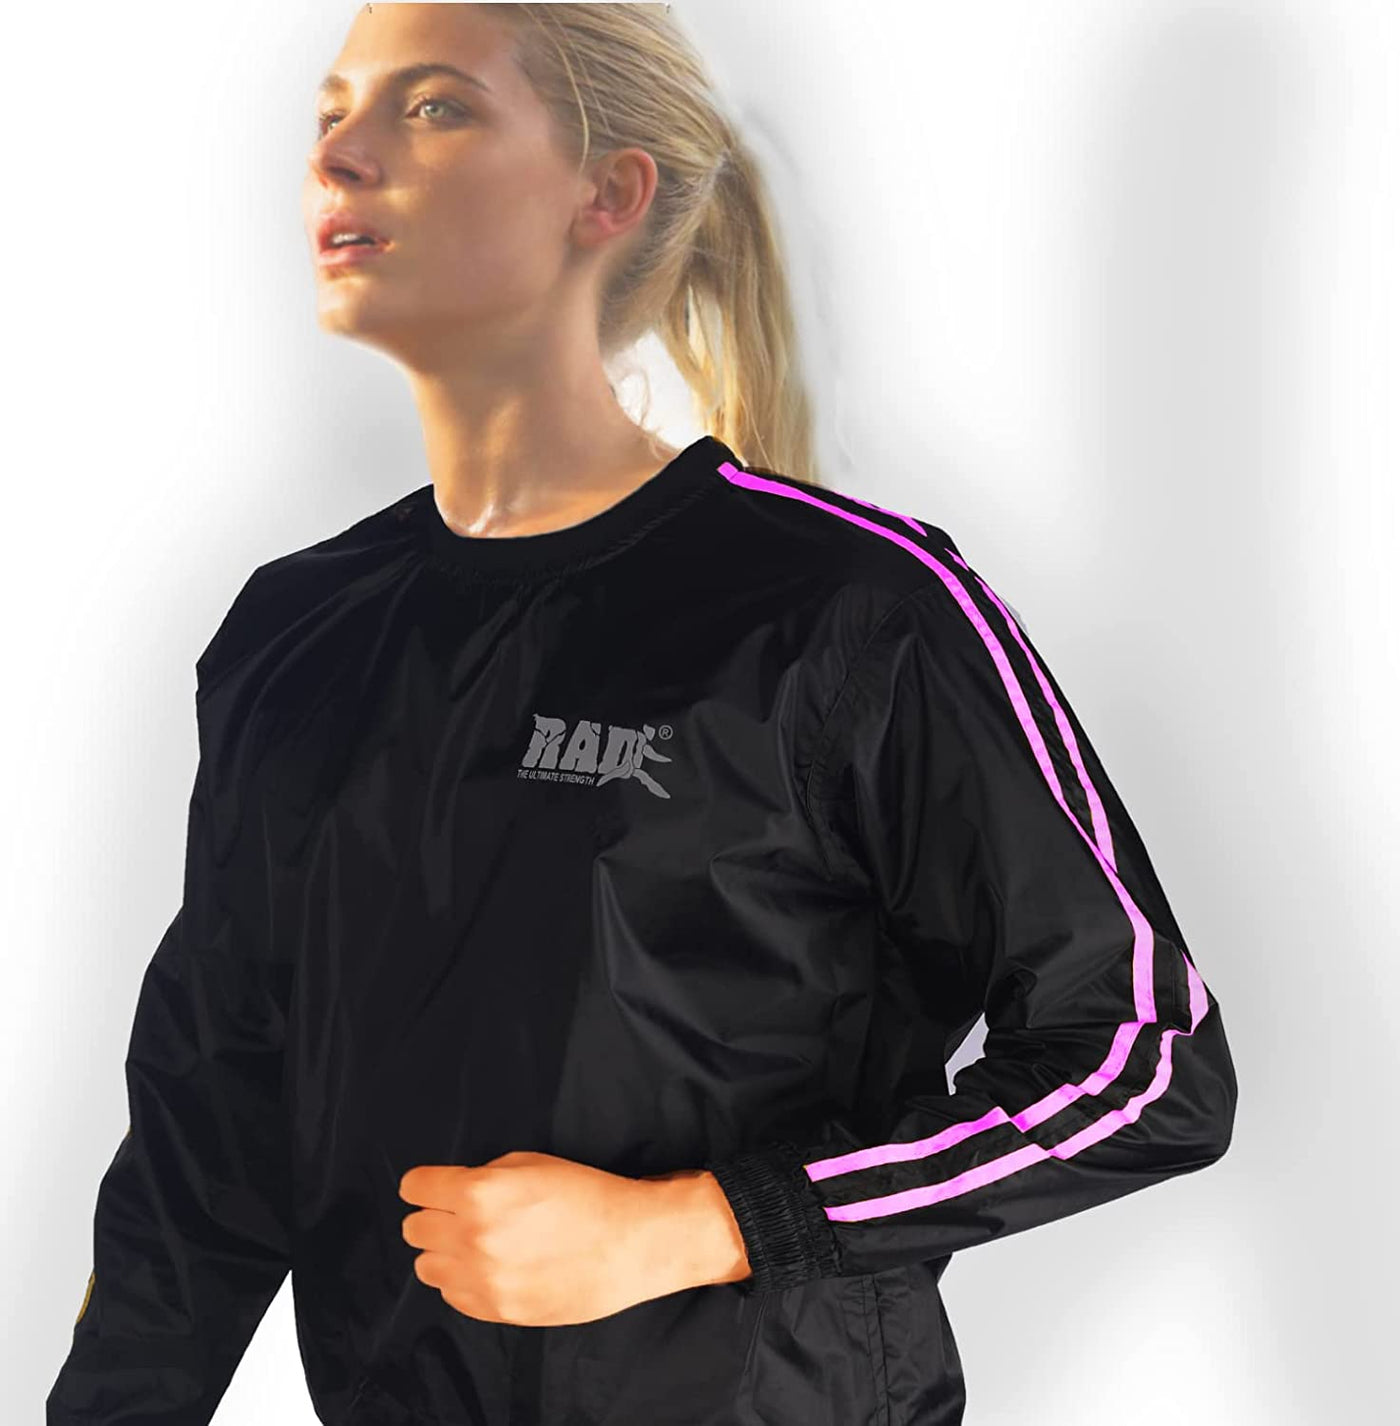 Heavy Duty Sweat Suit Sauna Suit Exercise Gym Suit Fitness Weight Loss  Anti-Rip 6025719497259